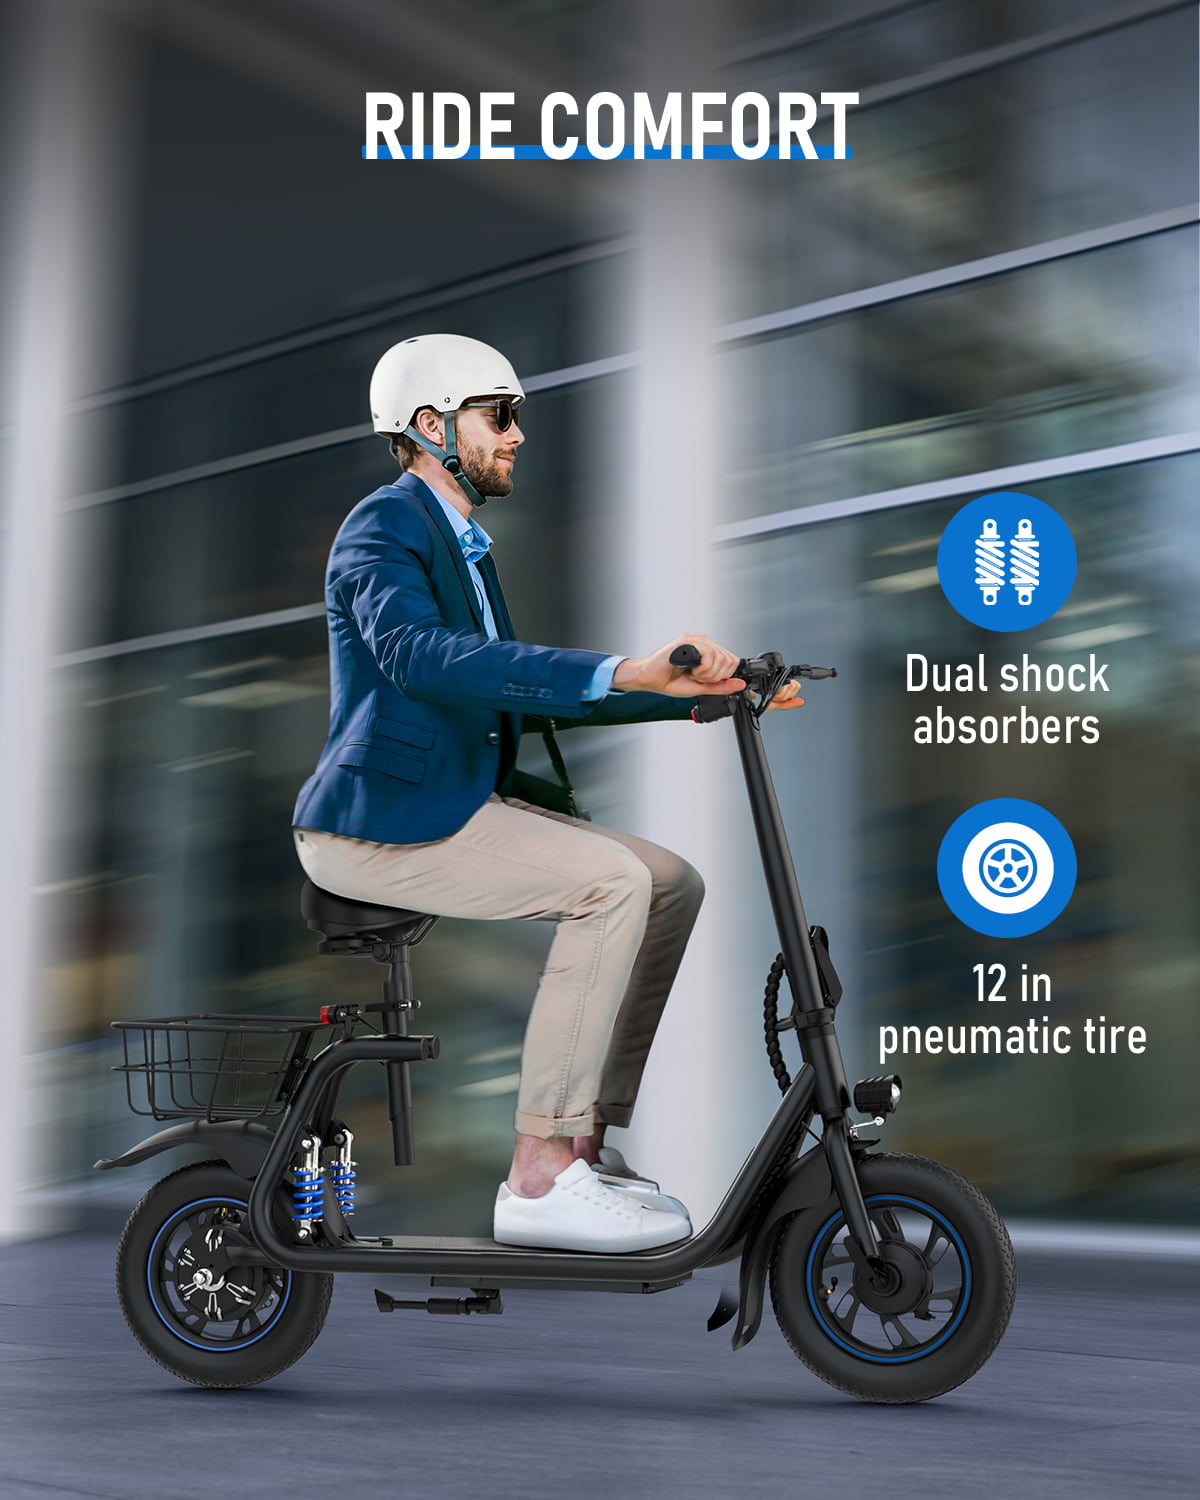 Kistp 450W Electric Scooter with Seat for Adult, 12 inch Commuter Electric Scooter with Basket - up to 21 Miles 15.5MPH